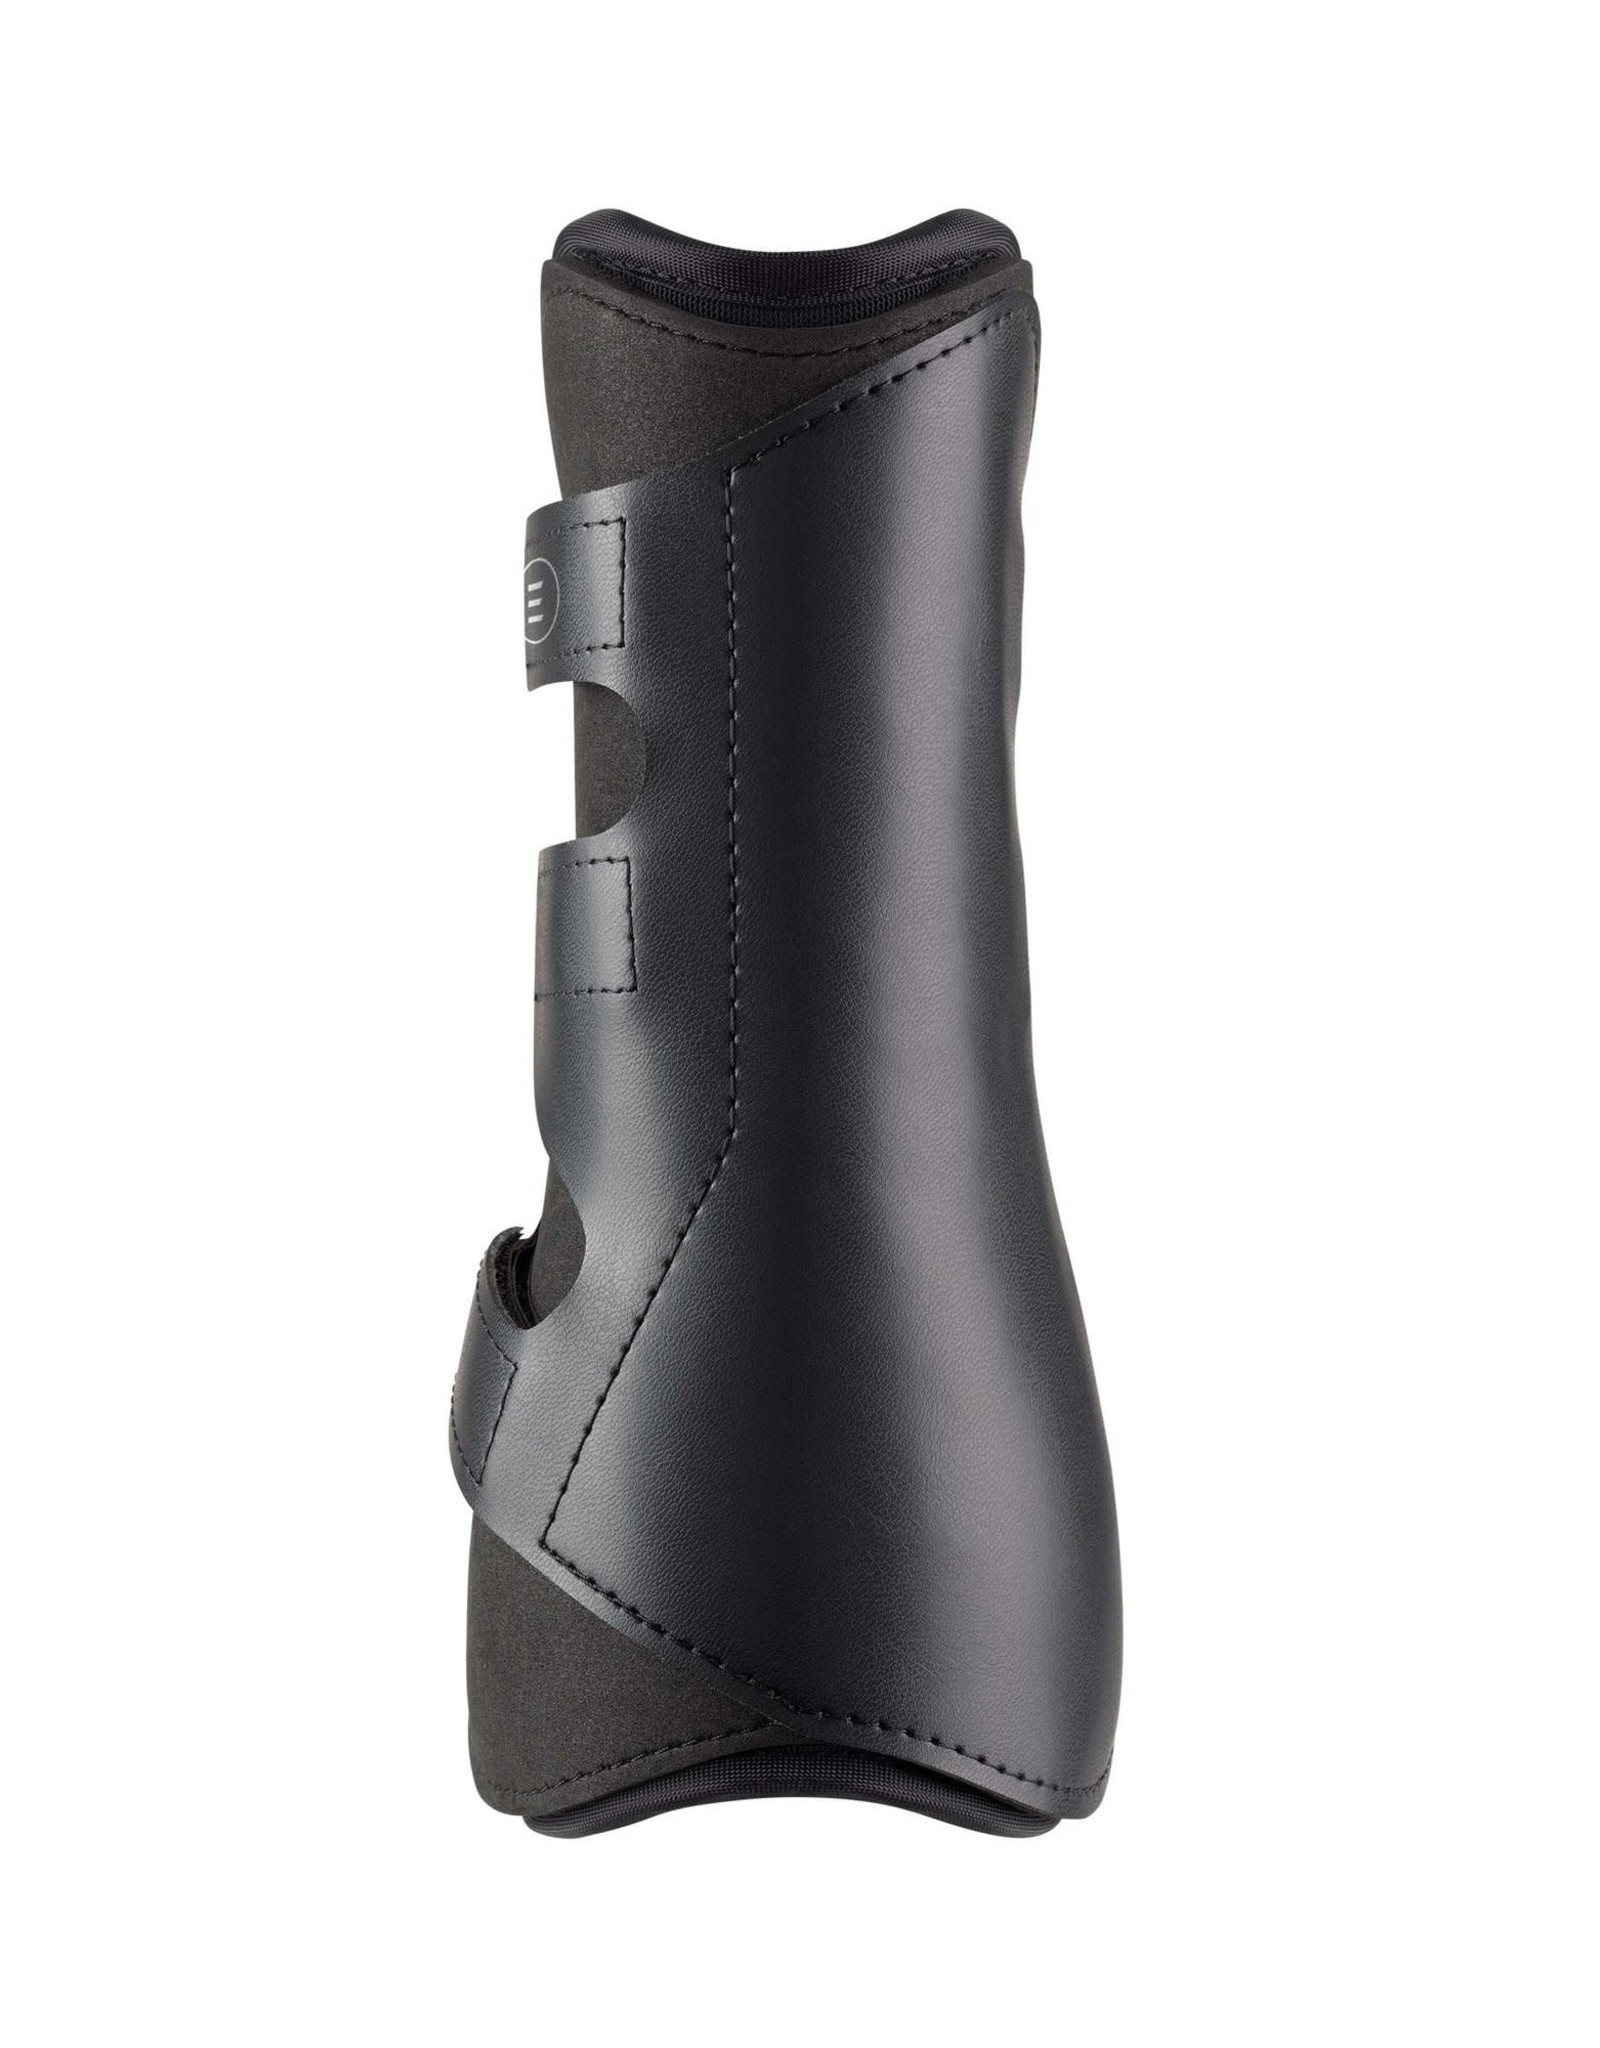 EQUIFIT ESSENTIAL: THE ORIGINAL OPEN FRONT BOOT